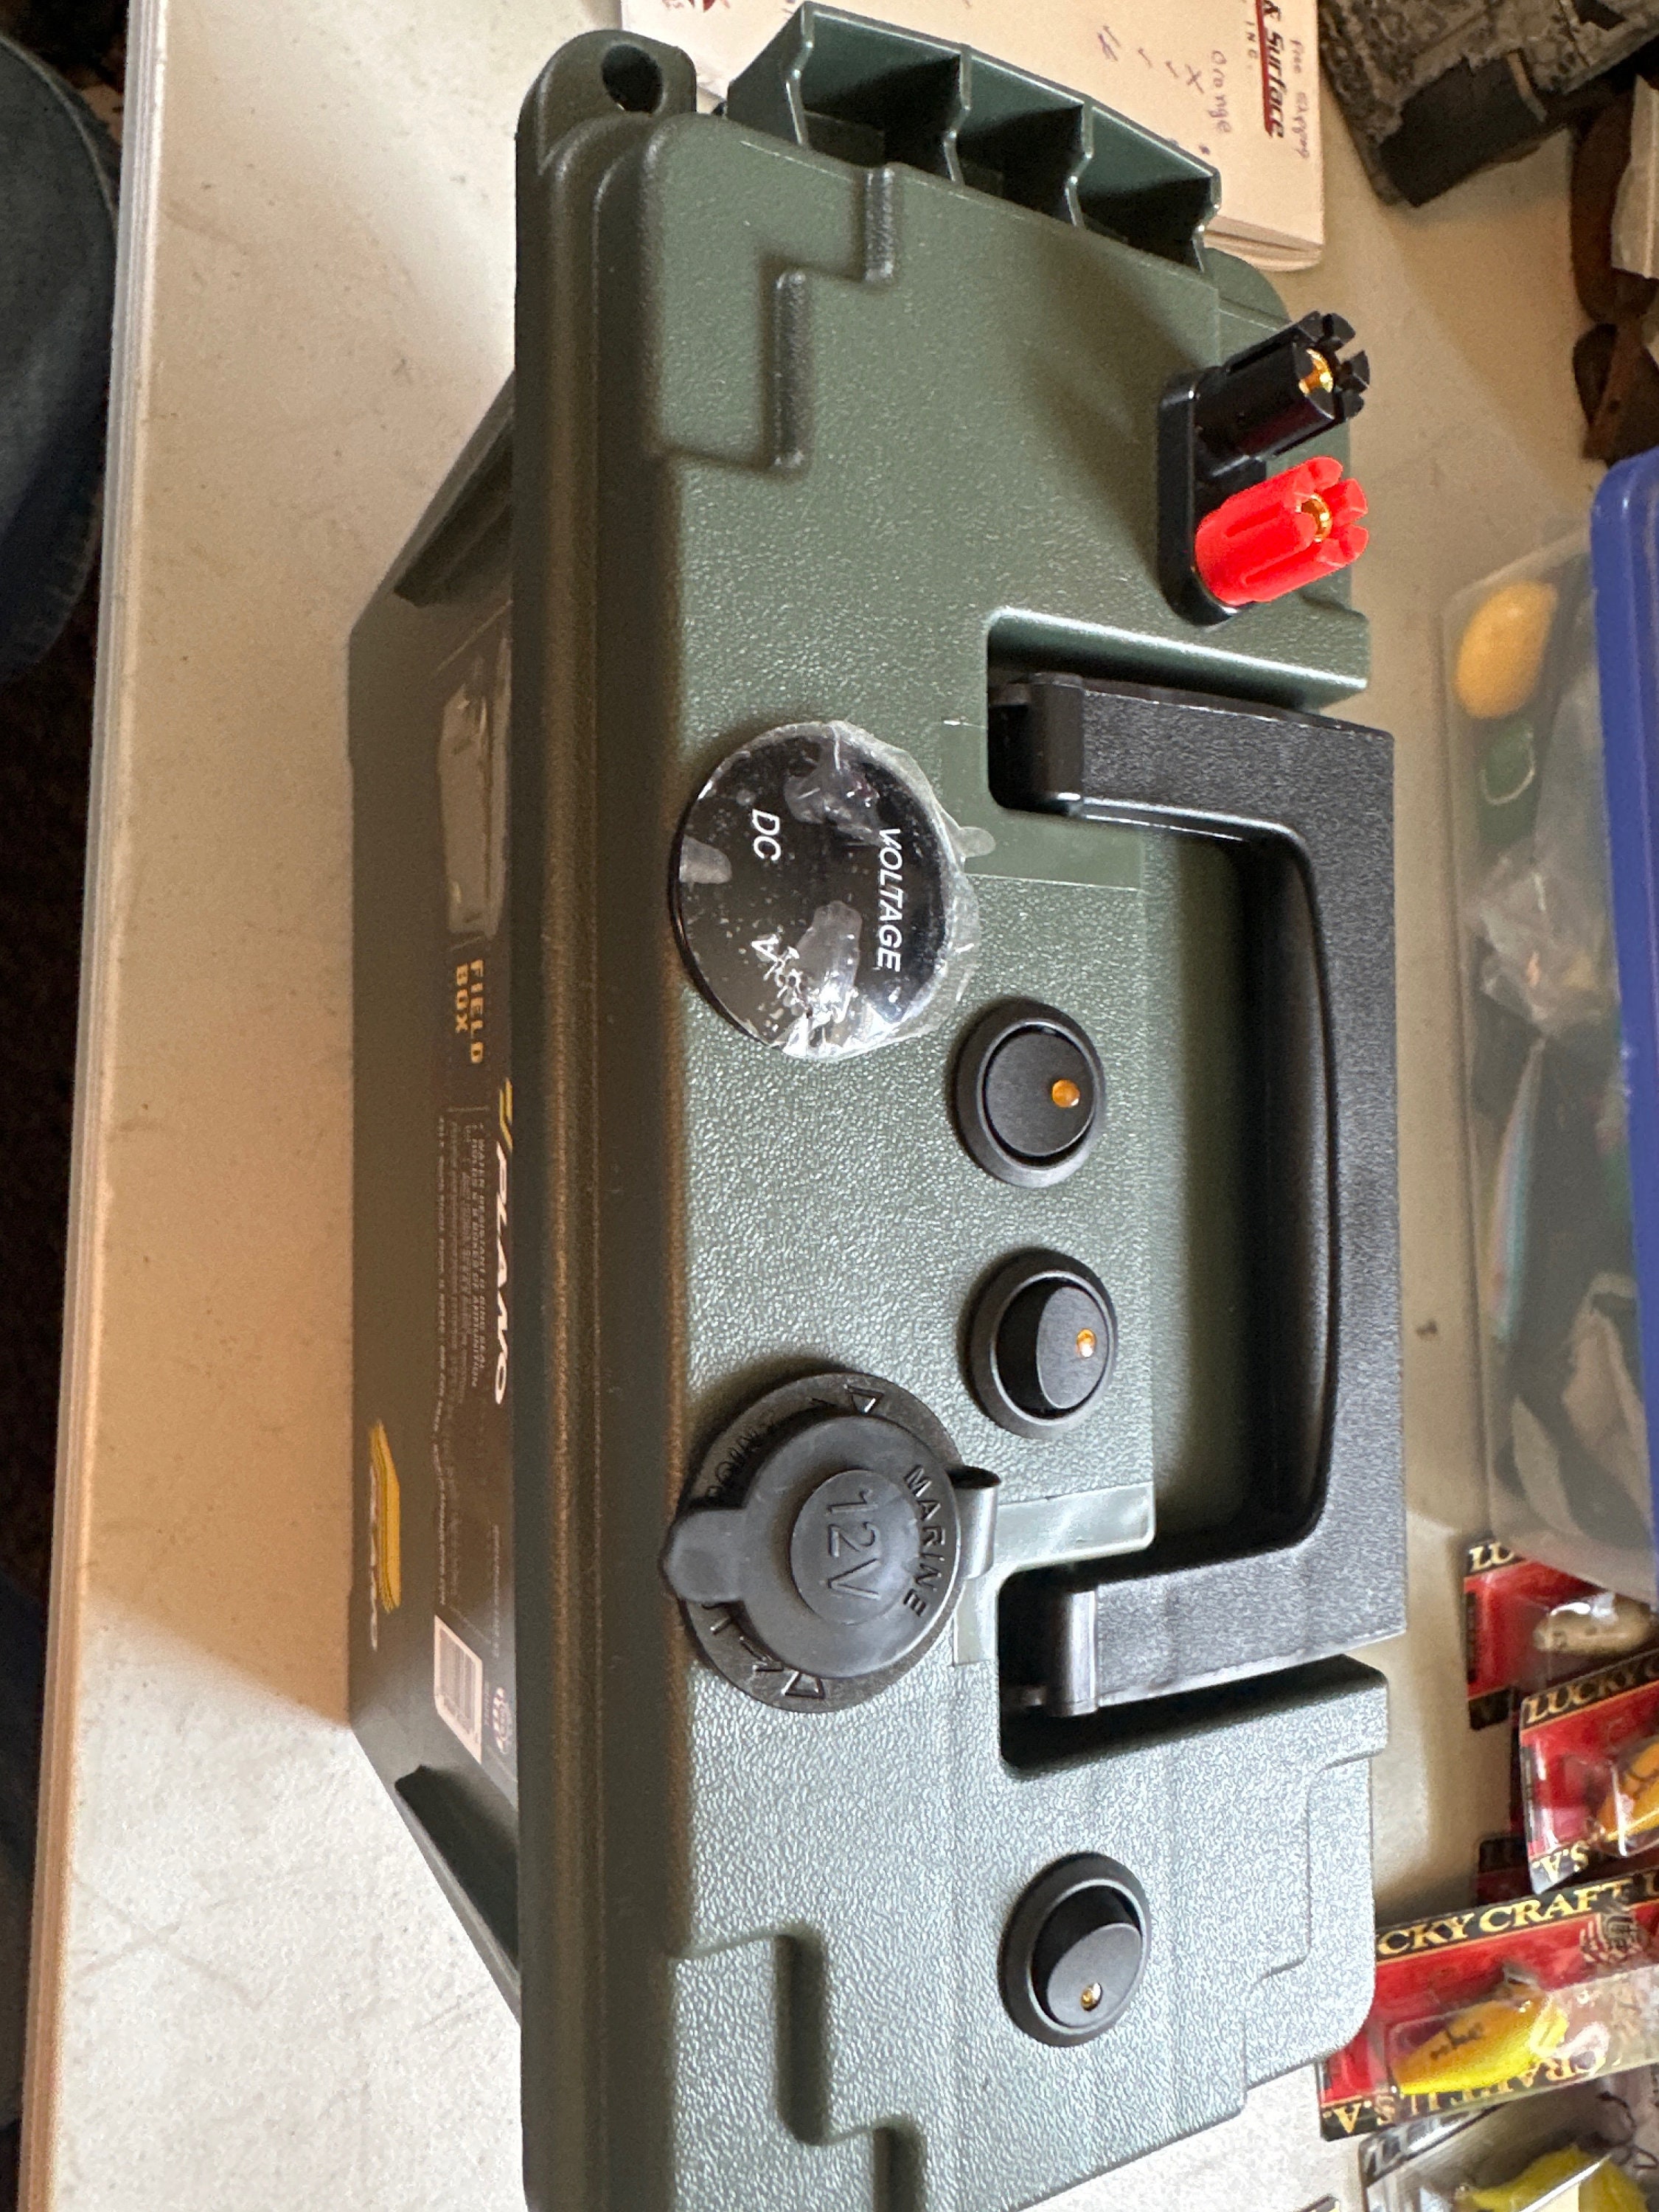 General Green Battery Box Good for Fishing, Hunting, Camping, Boating, etc.